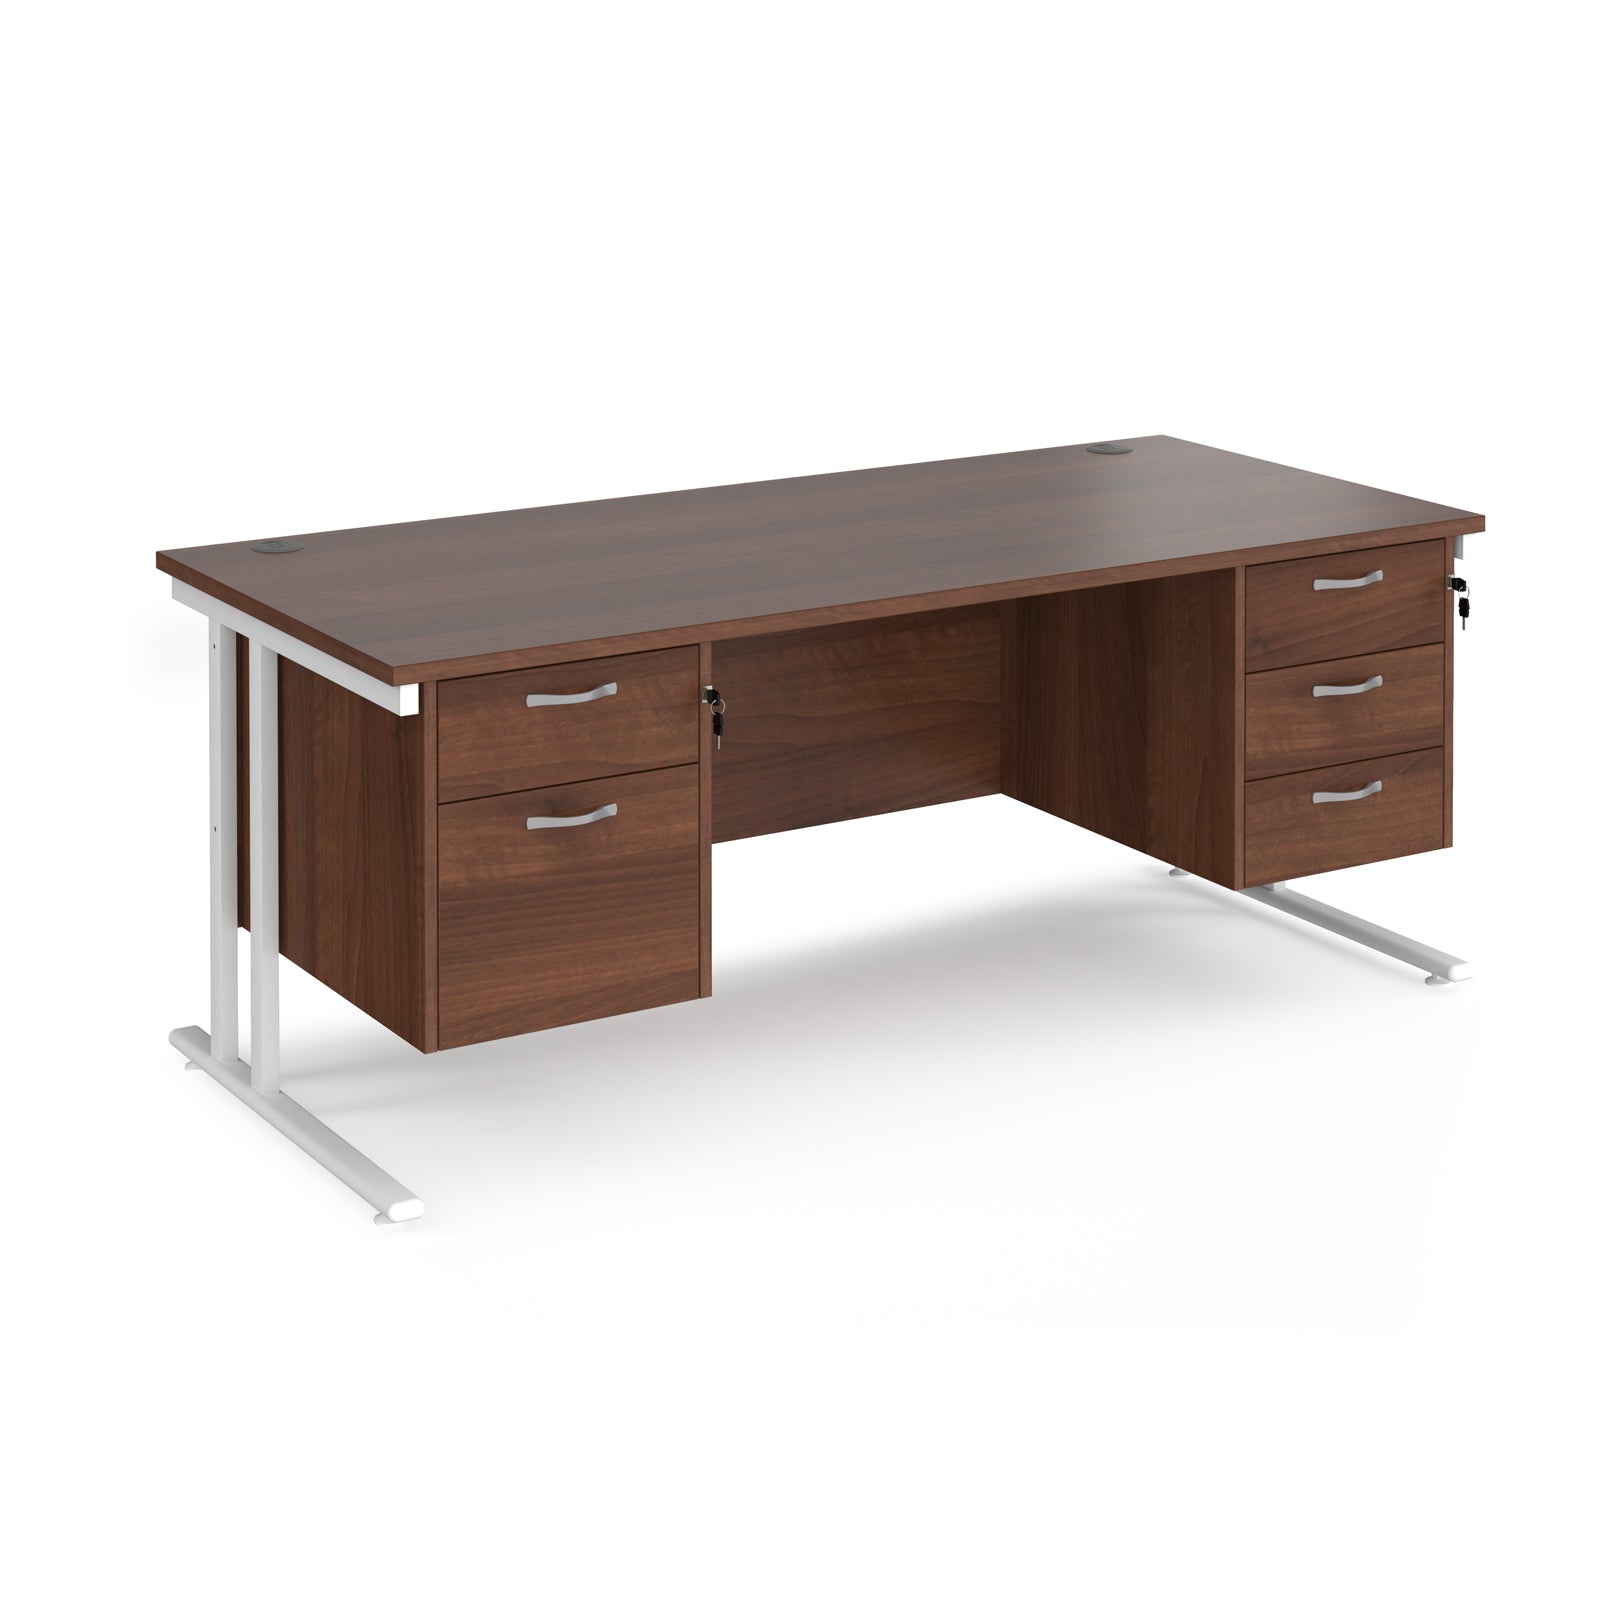 Maestro 800mm Deep Straight Cantilever Leg Office Desk with Three and Two Drawer Pedestal